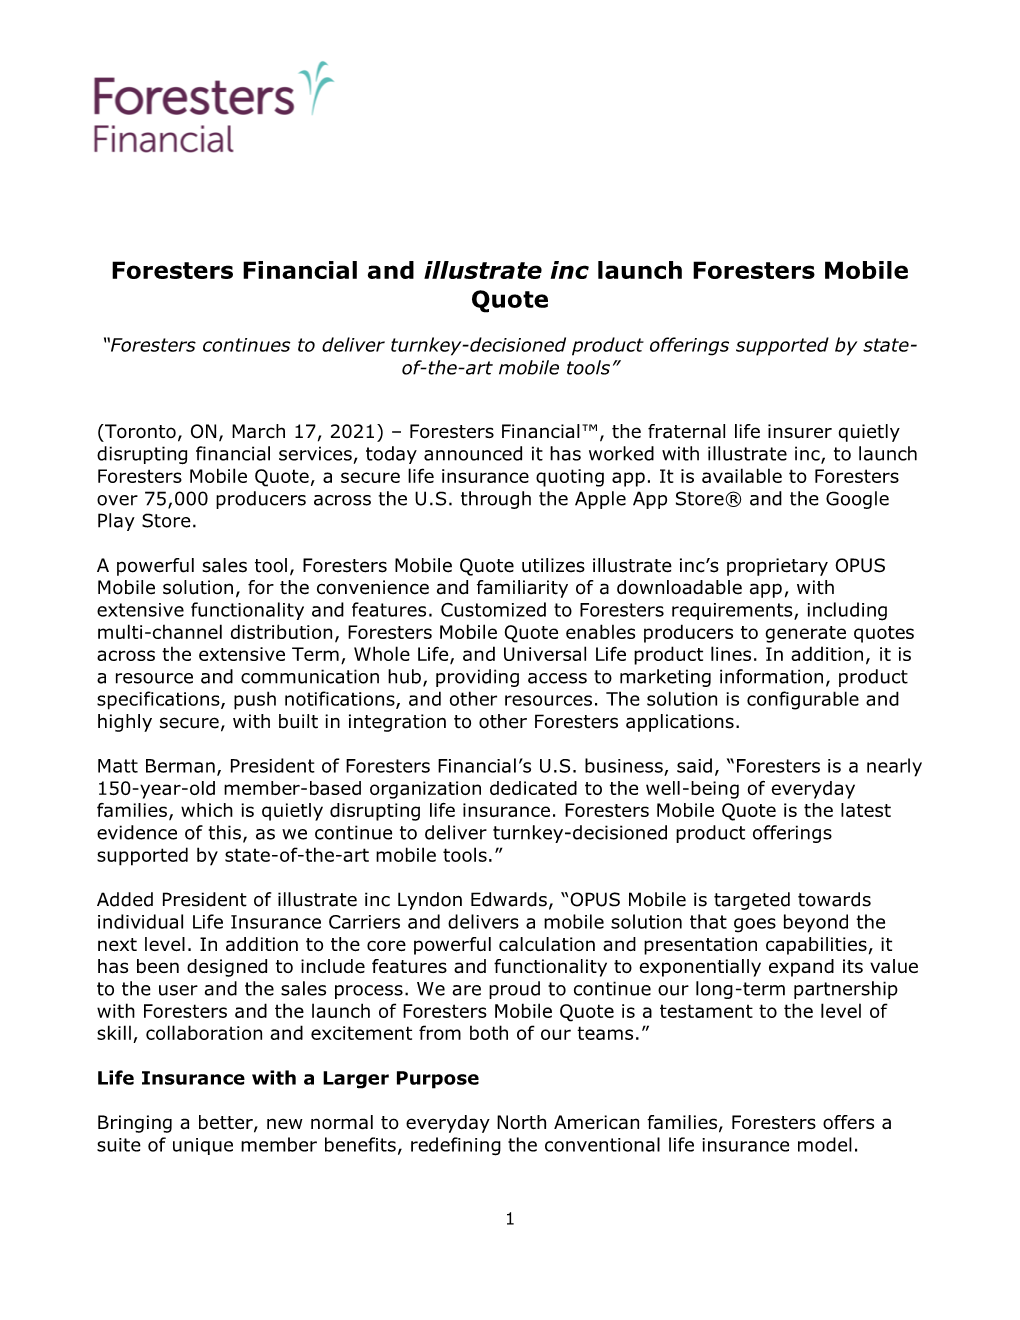 Foresters Financial and Illustrate Inc Launch Foresters Mobile Quote